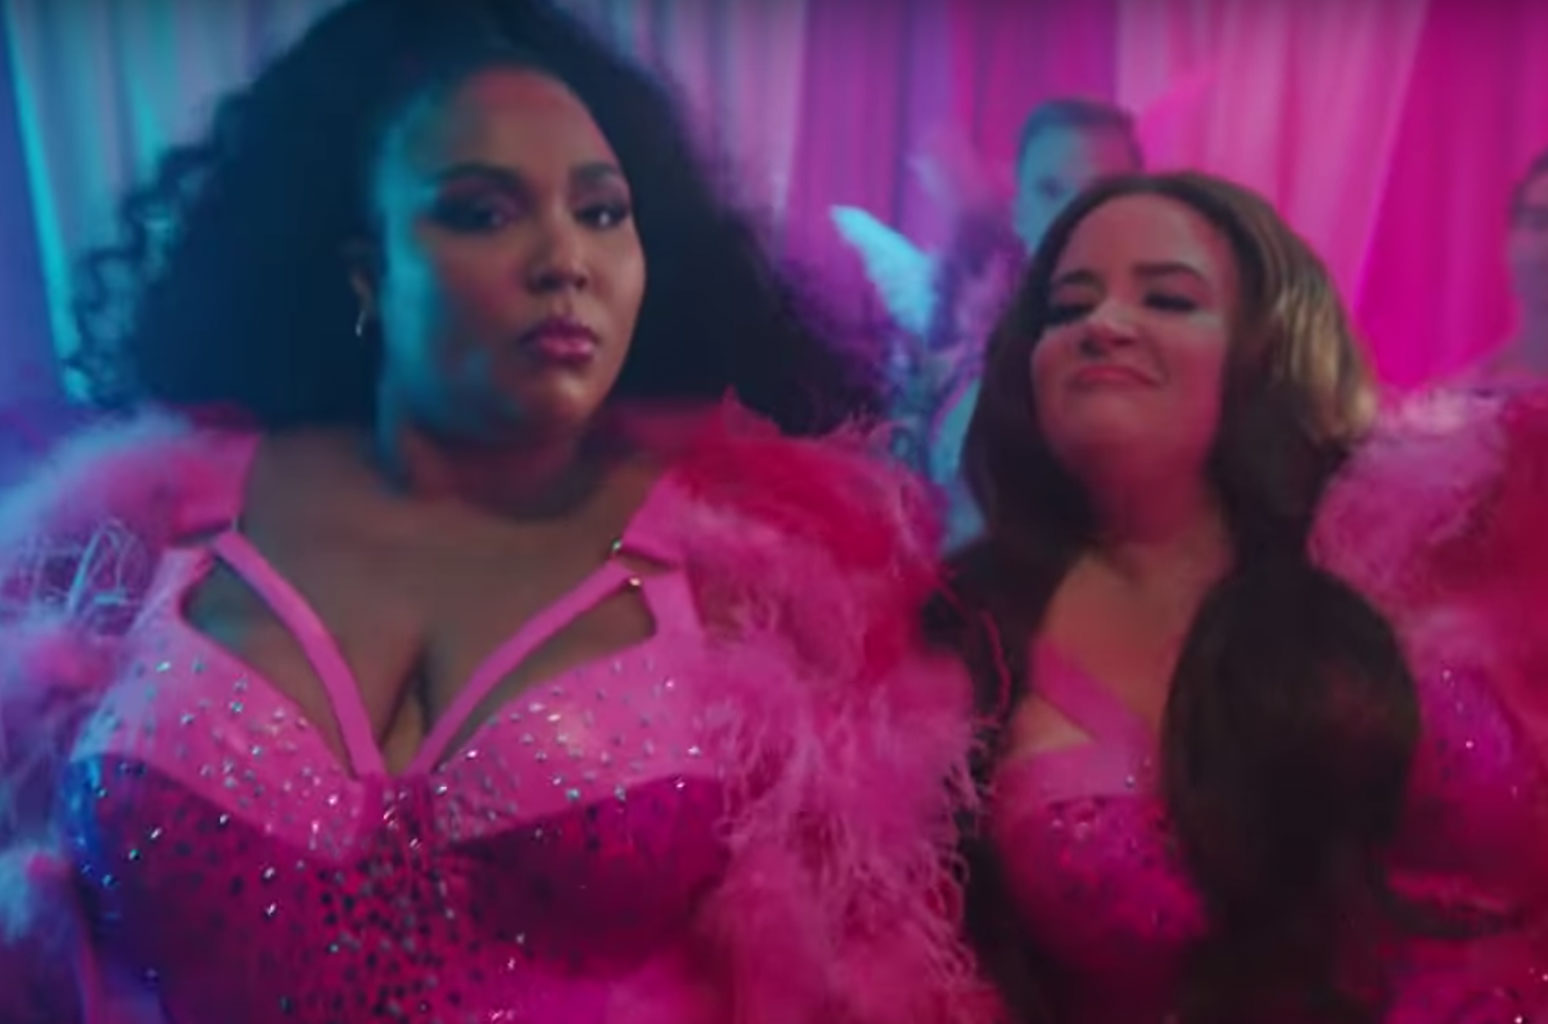 Aidy Bryant Tries Out Lizzo-Inspired Confidence on Eddie Murphy in Cut 'SNL' Sketch: Watch - www.billboard.com